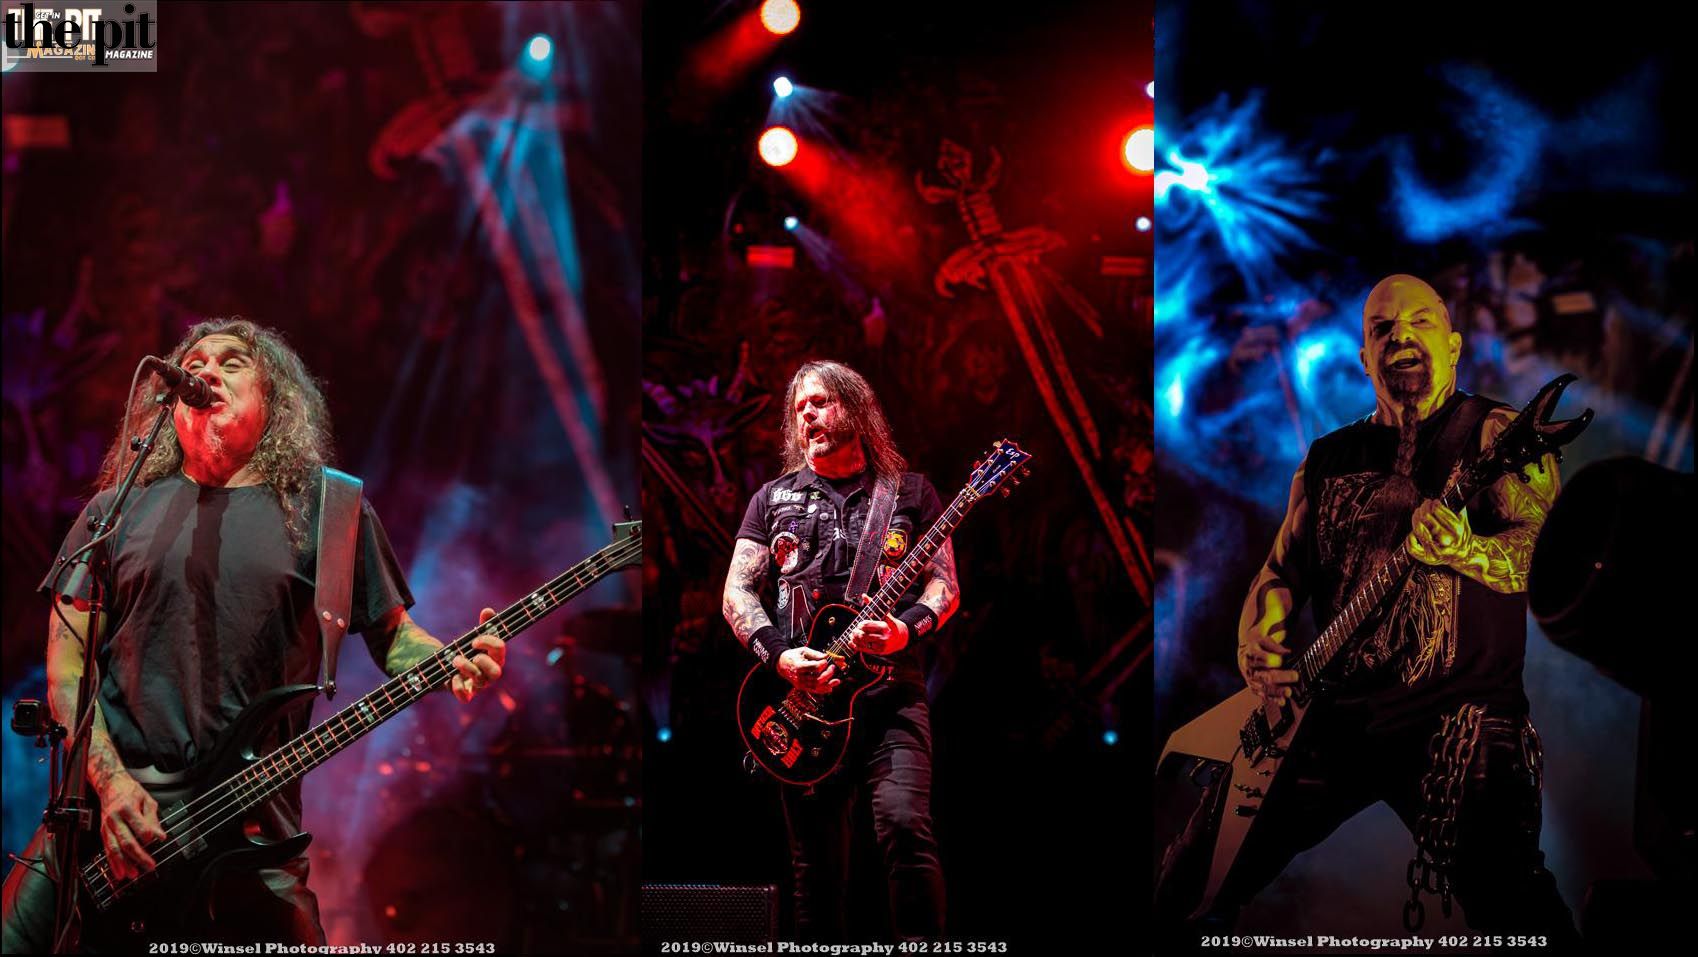 Three images of rock musicians performing on stage: one singing and playing bass, one playing guitar, and one singing with intense expression, all under colorful stage lighting. The vibe is reminiscent of a